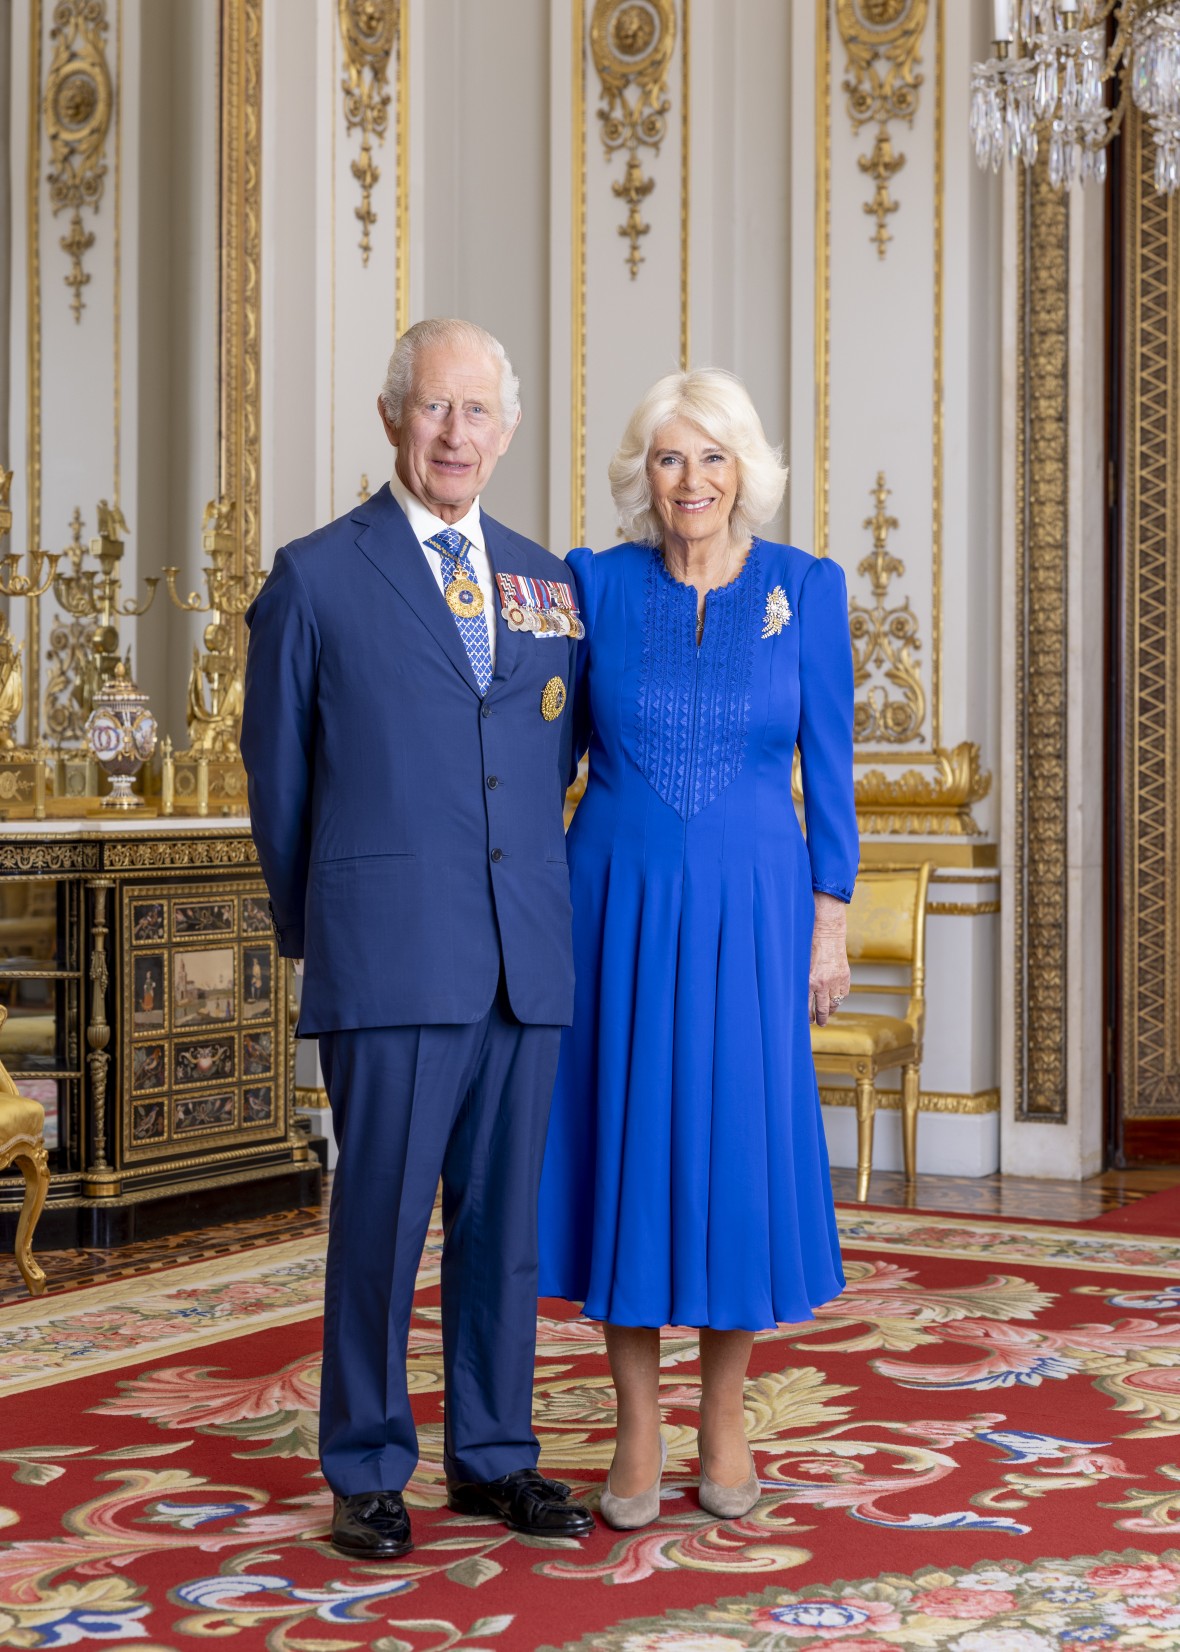 His Majesty King Charles III and Queen Camilla (full length version)